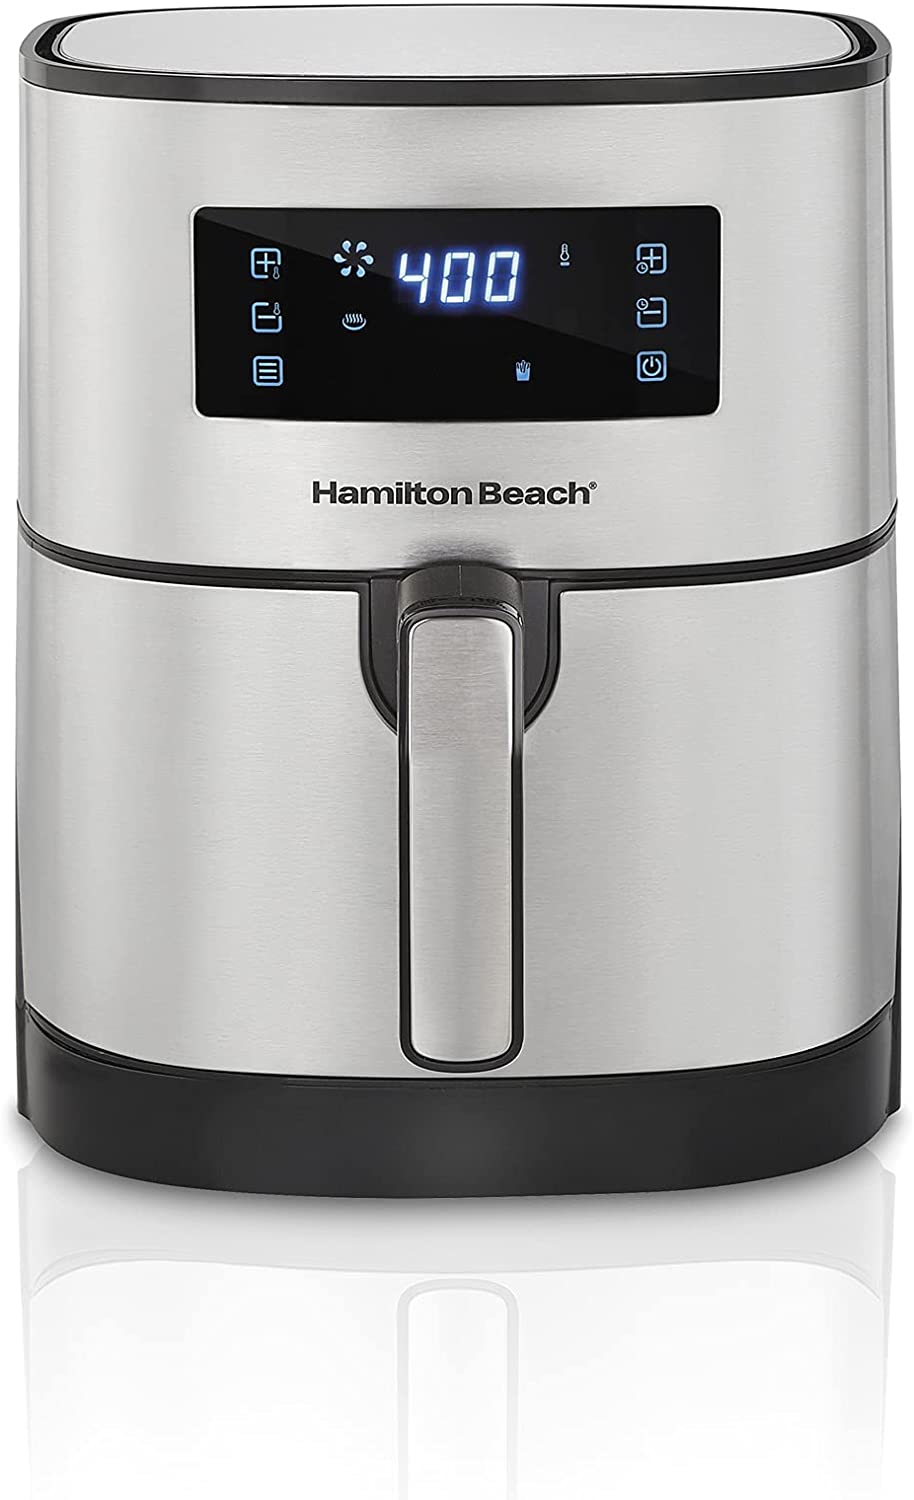 Hamilton Beach 5.8 Quart Digital Air Fryer Oven with 8 Presets, Easy to Clean Nonstick Basket, Black (35075) - $83.99 with Free Shipping ($120 retail)